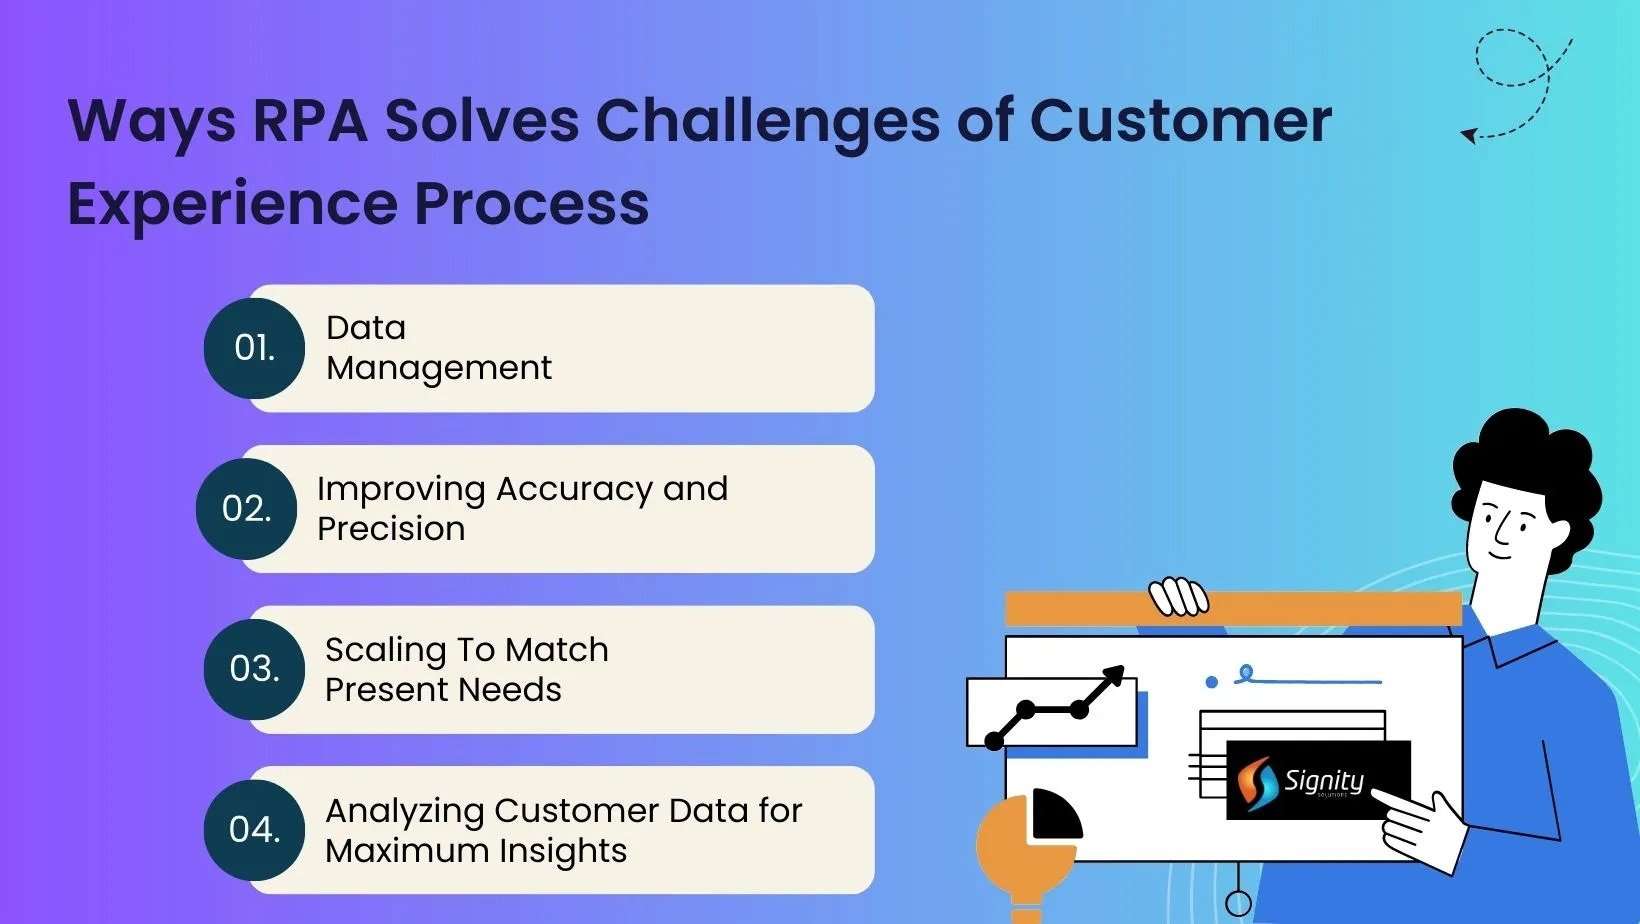 RPA Solves Challenges of Customer Experience Process